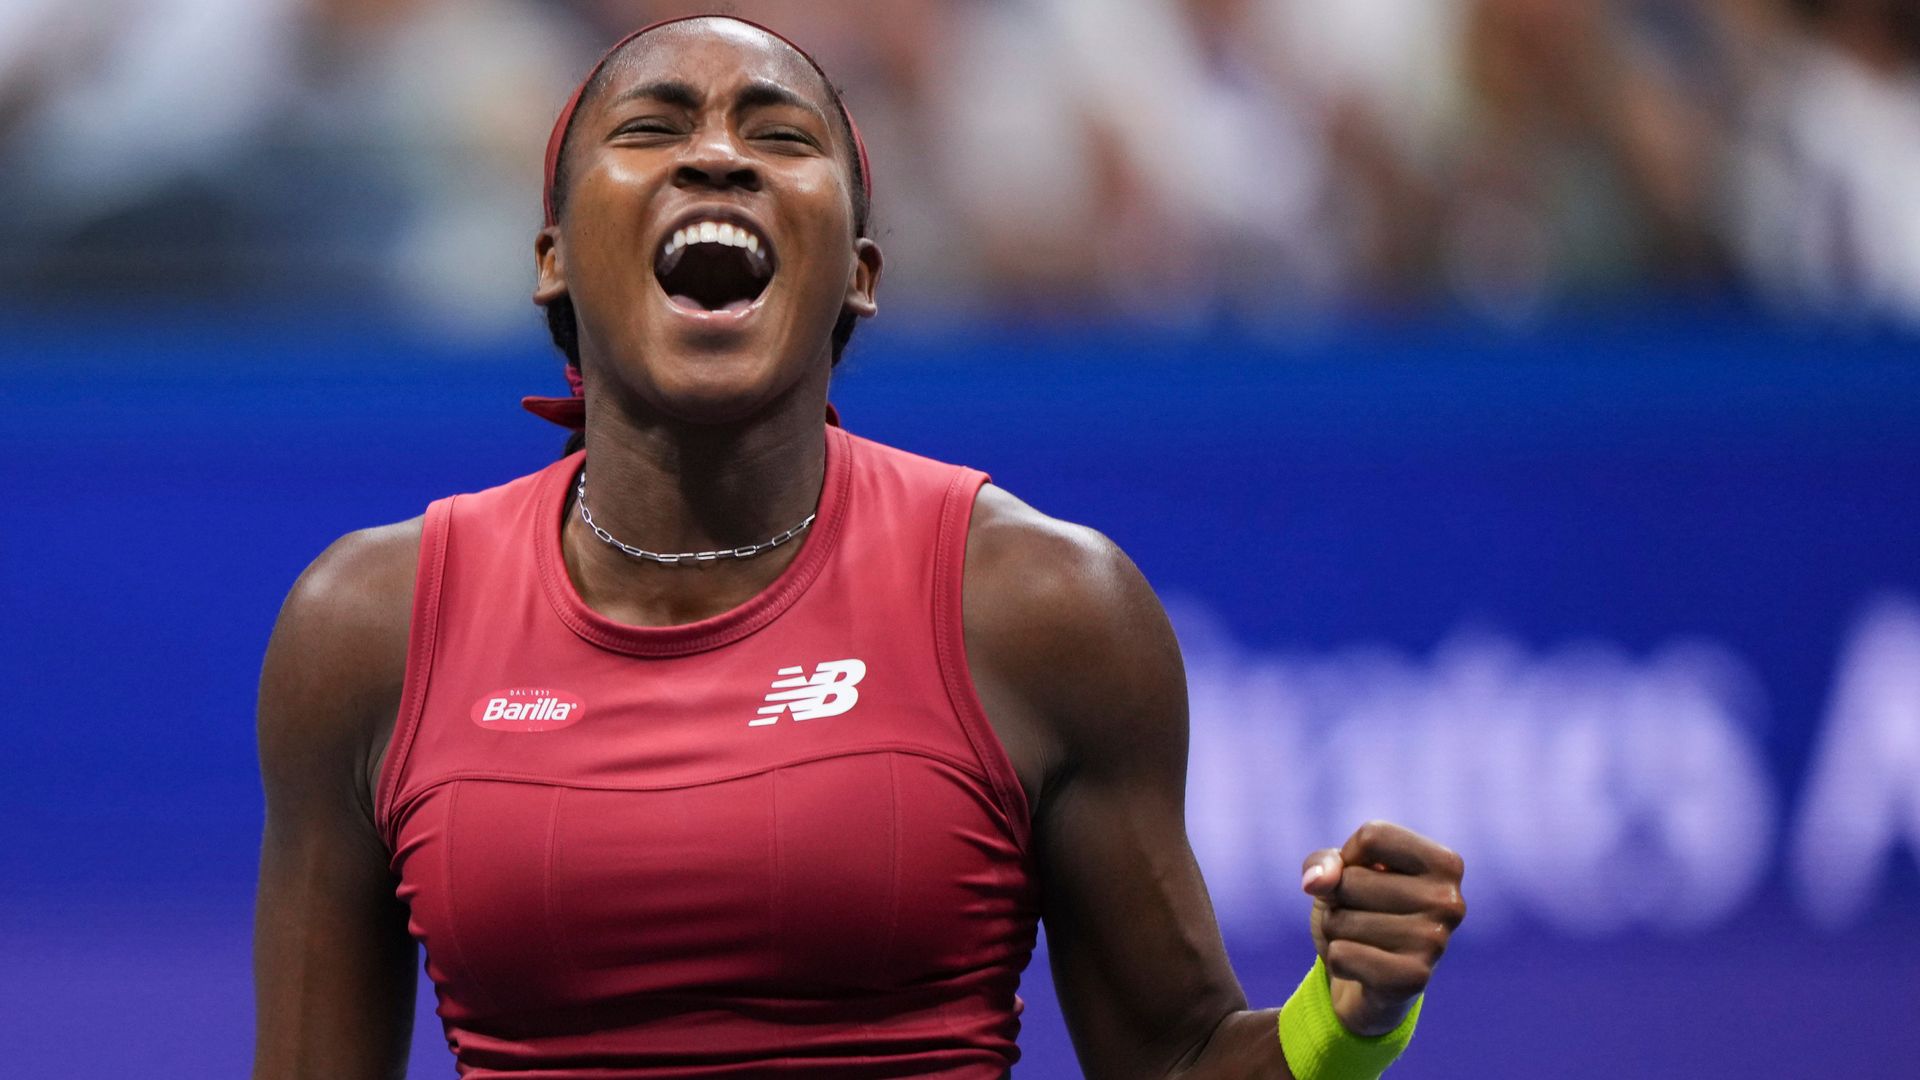 Gauff's American dream and her rise to Grand Slam glory at the US Open